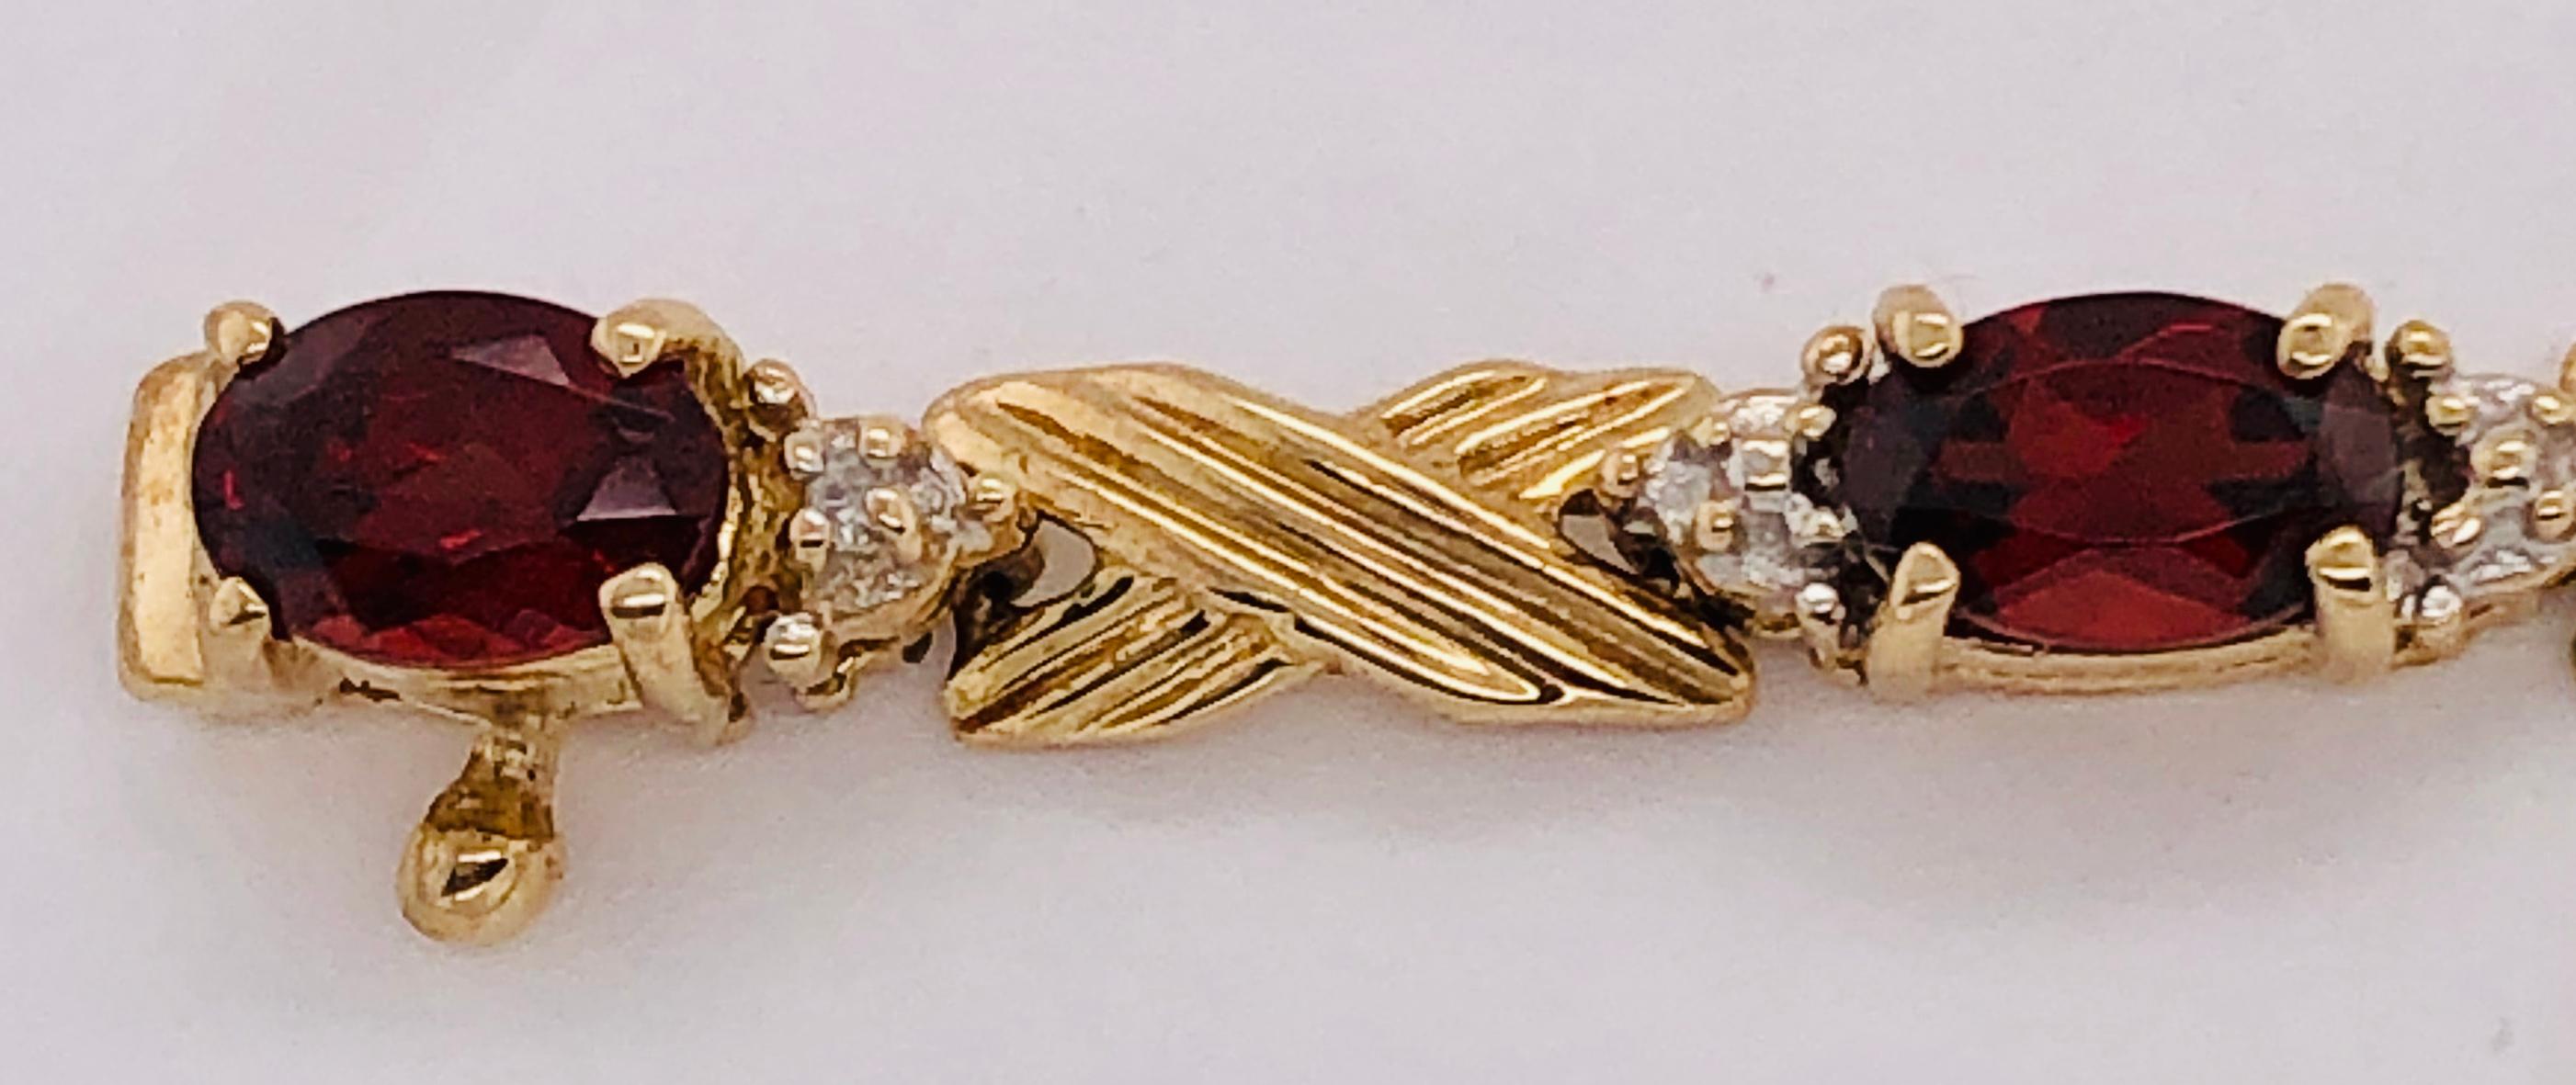 14 Karat Yellow Gold Braided Link Bracelet with Garnets and Diamond Accents In Good Condition For Sale In Stamford, CT